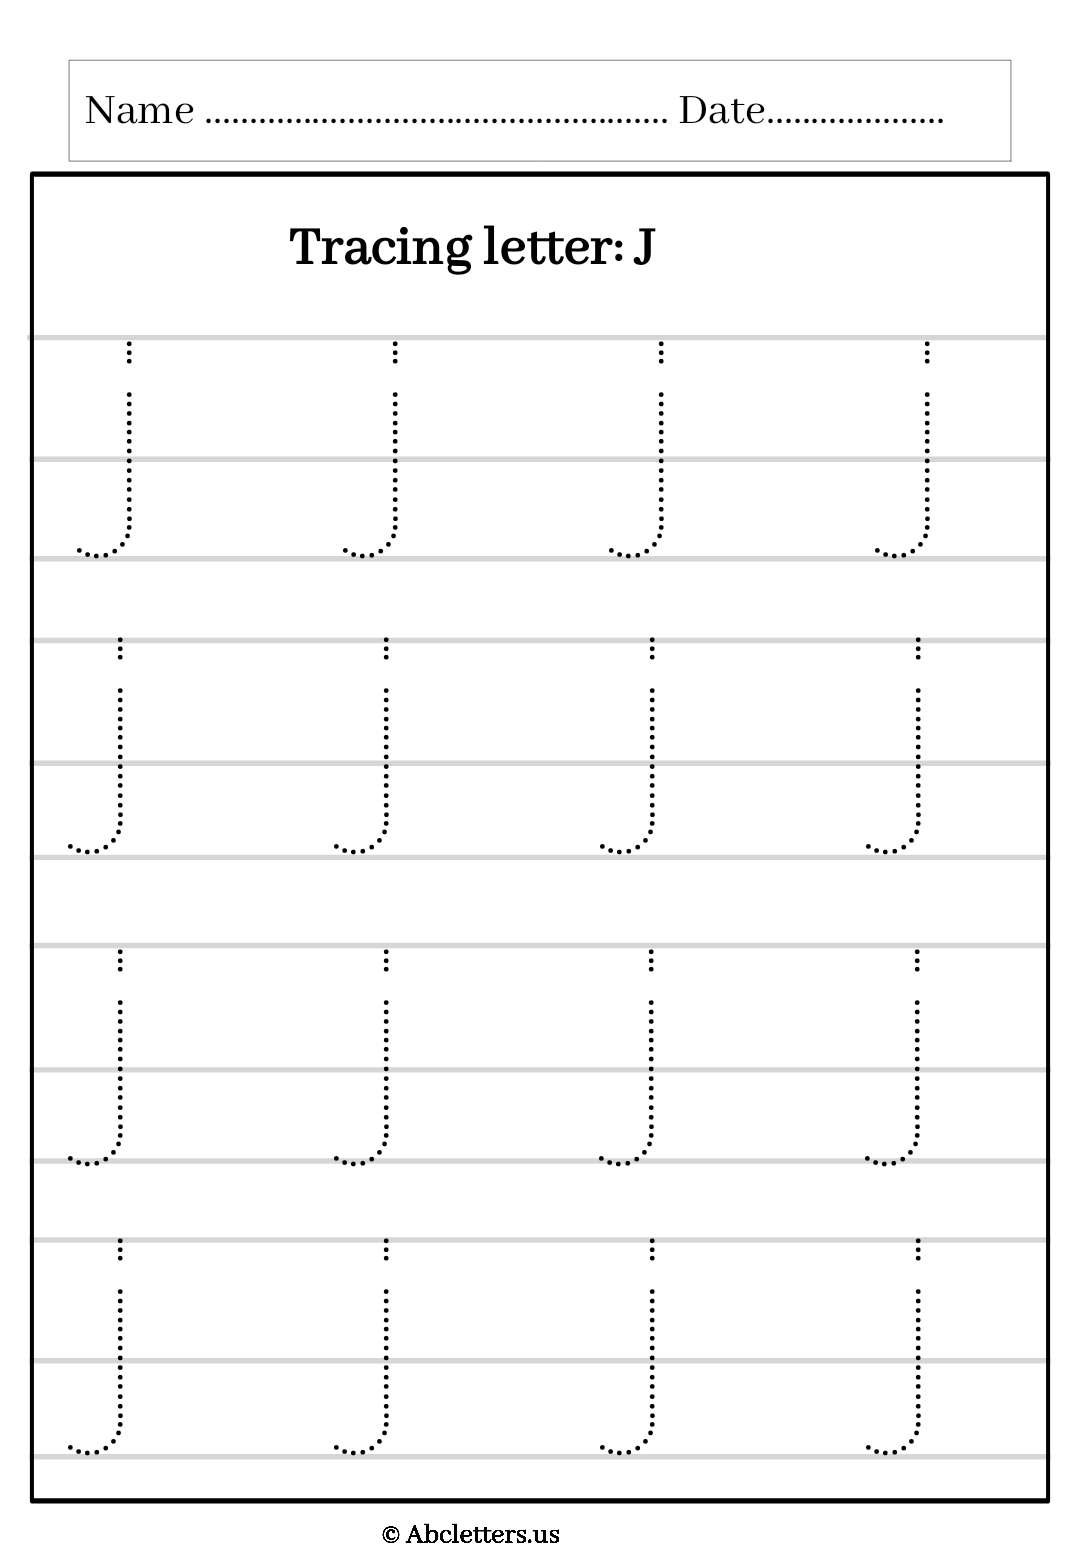 Tracing letter j lowercase with 3 lines